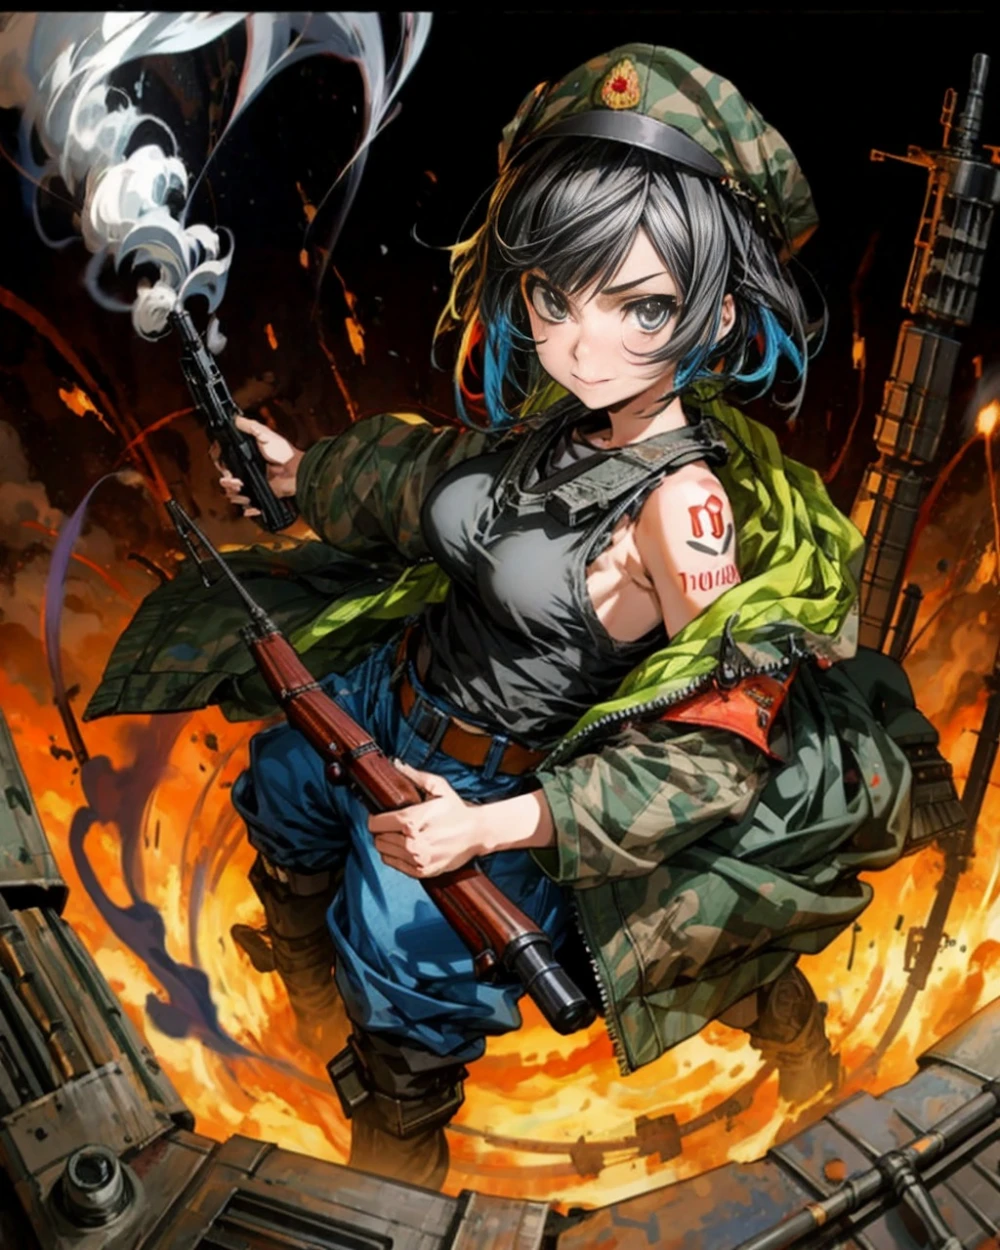 military-uniform-anime-style-all-ages-42